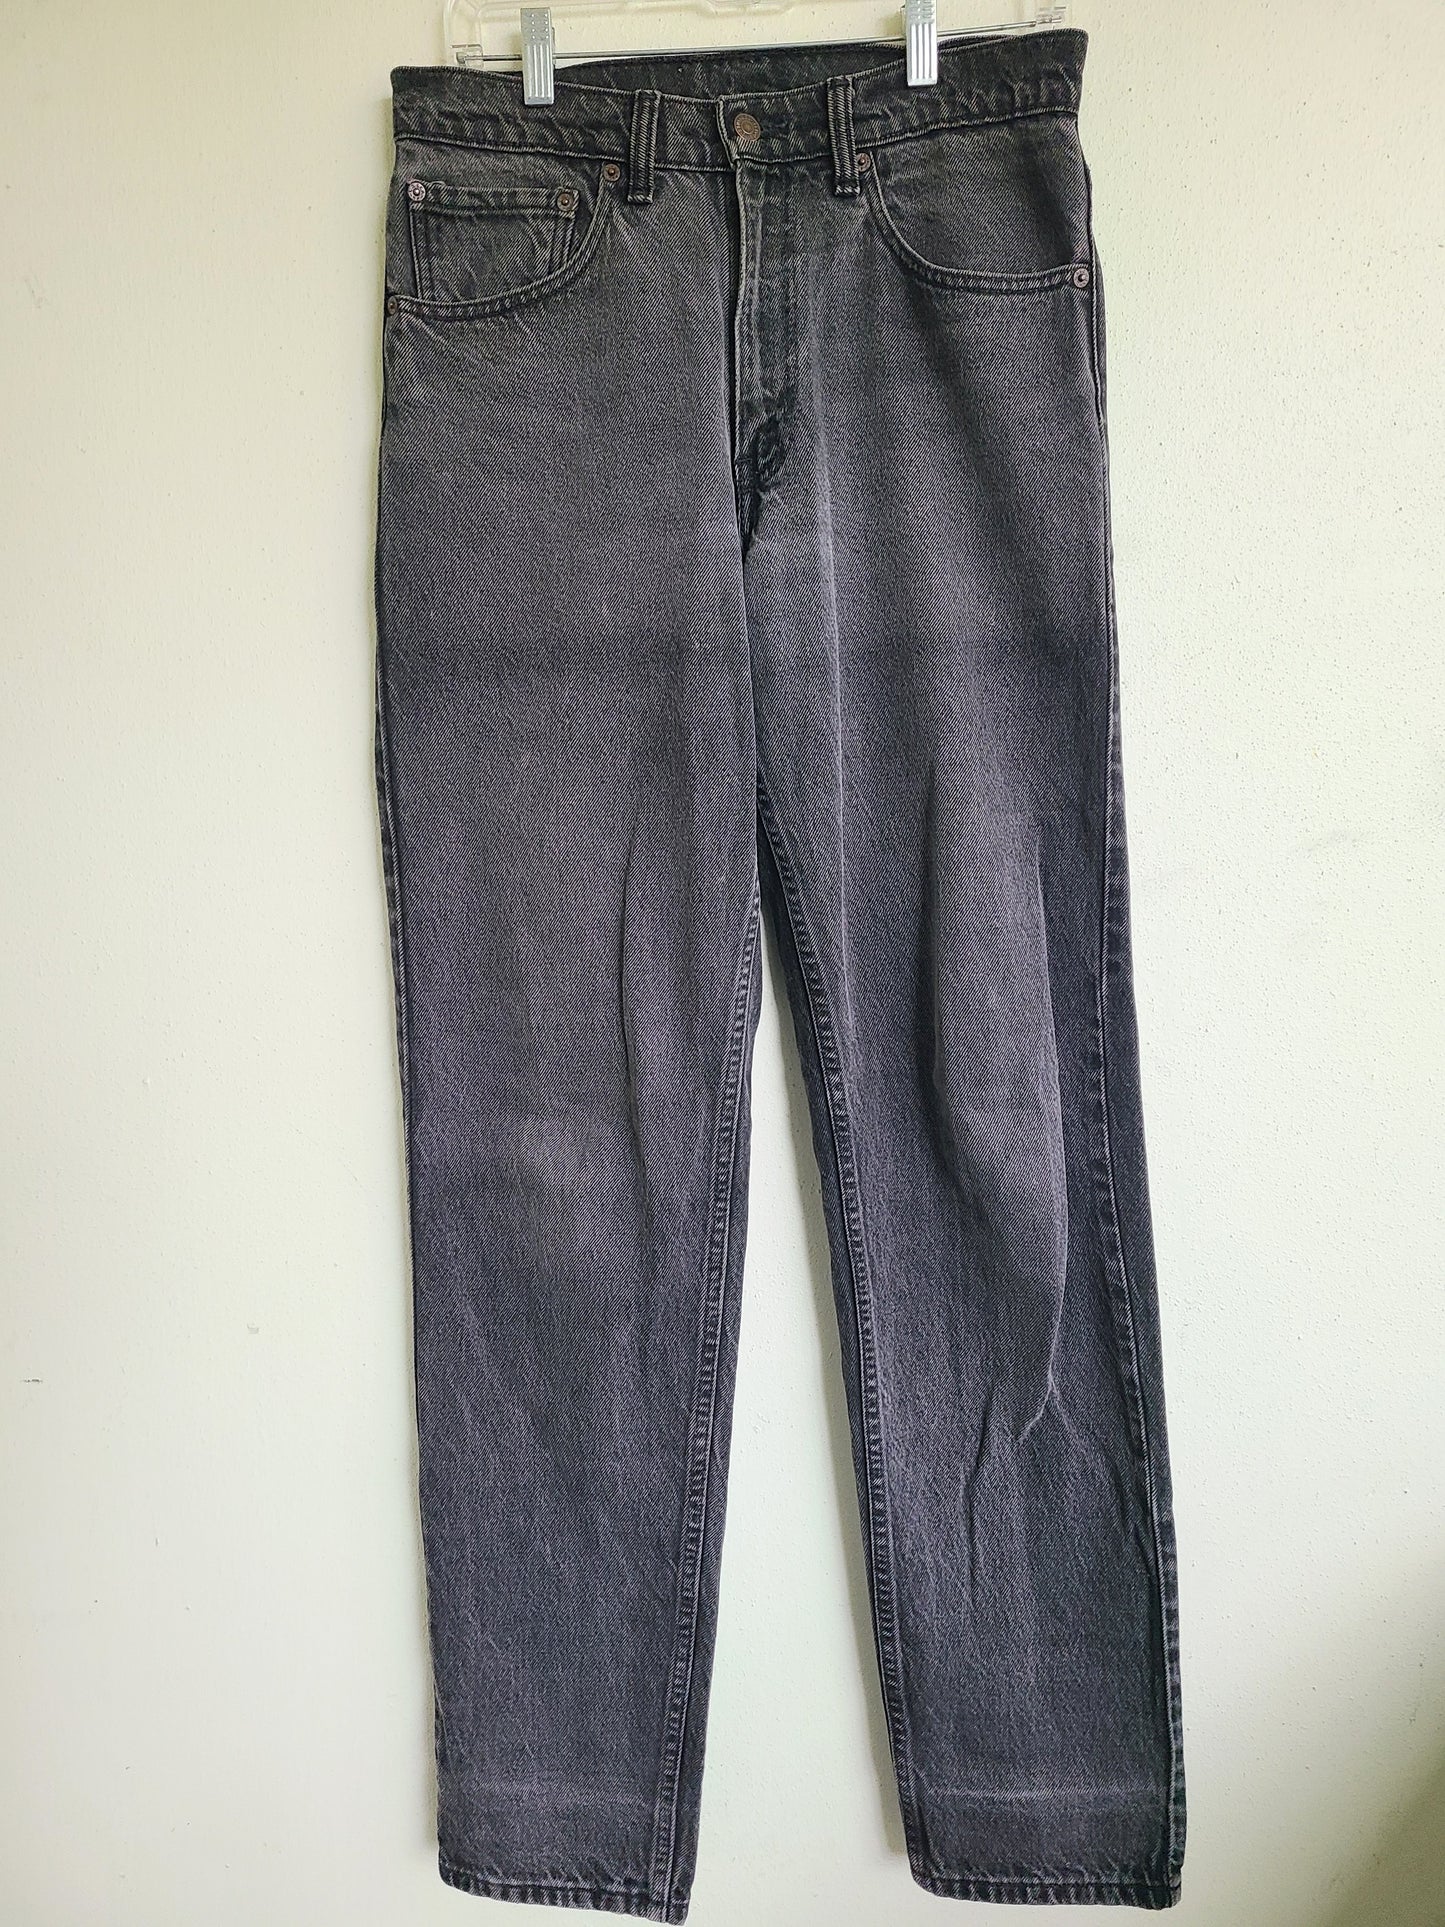 Vintage 550 LEVI’S Jeans Made In Canada 31 x 34